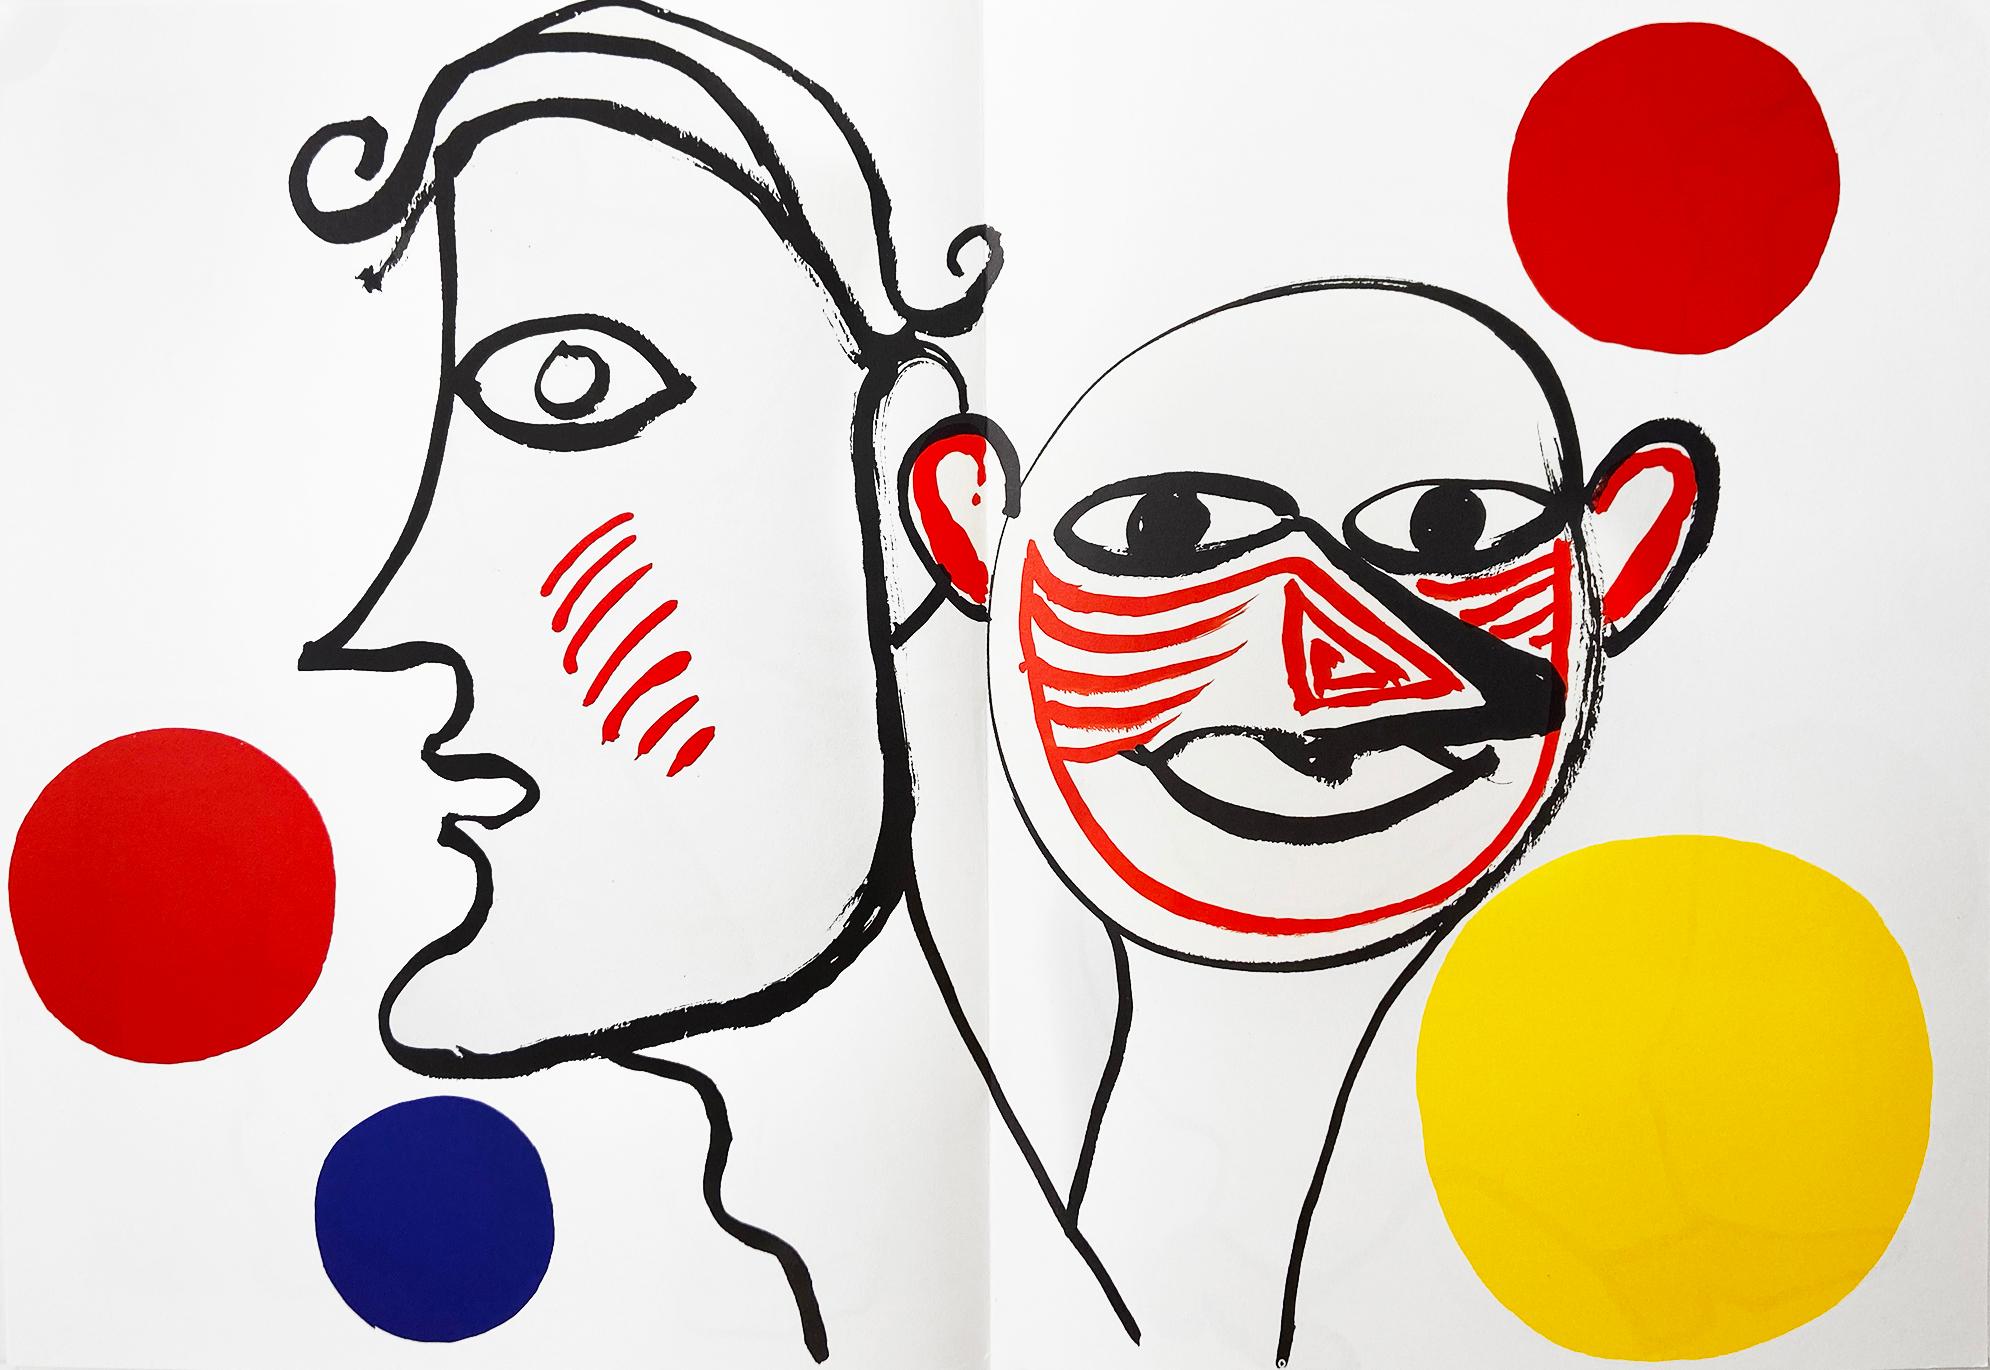 Alexander Calder Lithograph c. 1975:

Lithograph in colors; 15 x 22 inches.
Some corner bending on both upper areas; in otherwise good overall vintage condition with bright colors; contains center fold-line as originally issued.
Unsigned from an